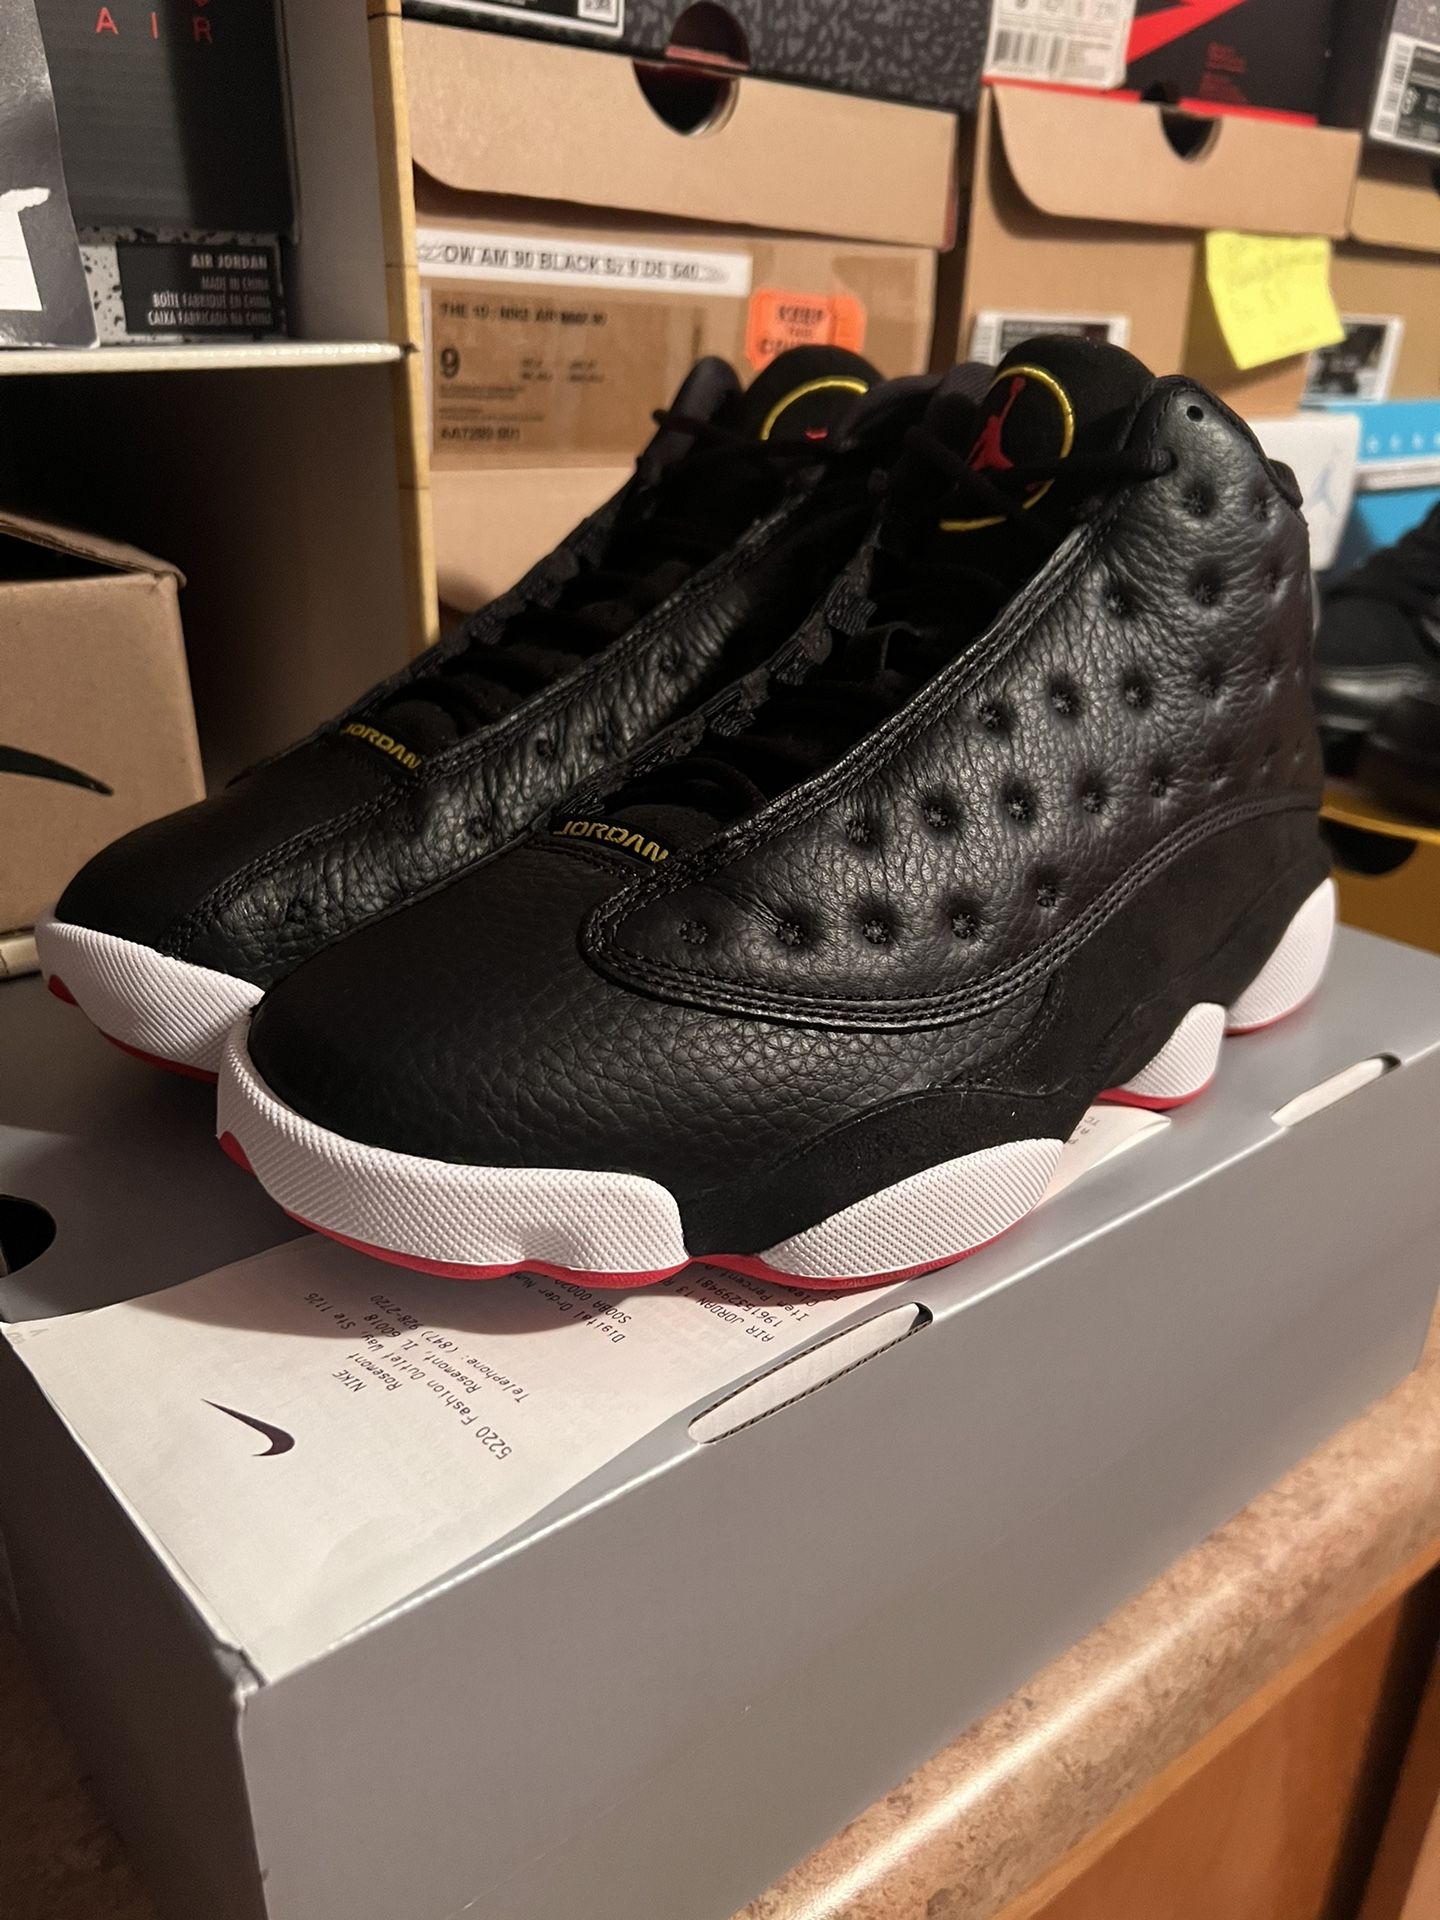 Controle Actuator Zo snel als een flits NIKE AIR JORDAN 13 PLAYOFF Sz 8 DS for Sale in Chicago, IL - OfferUp